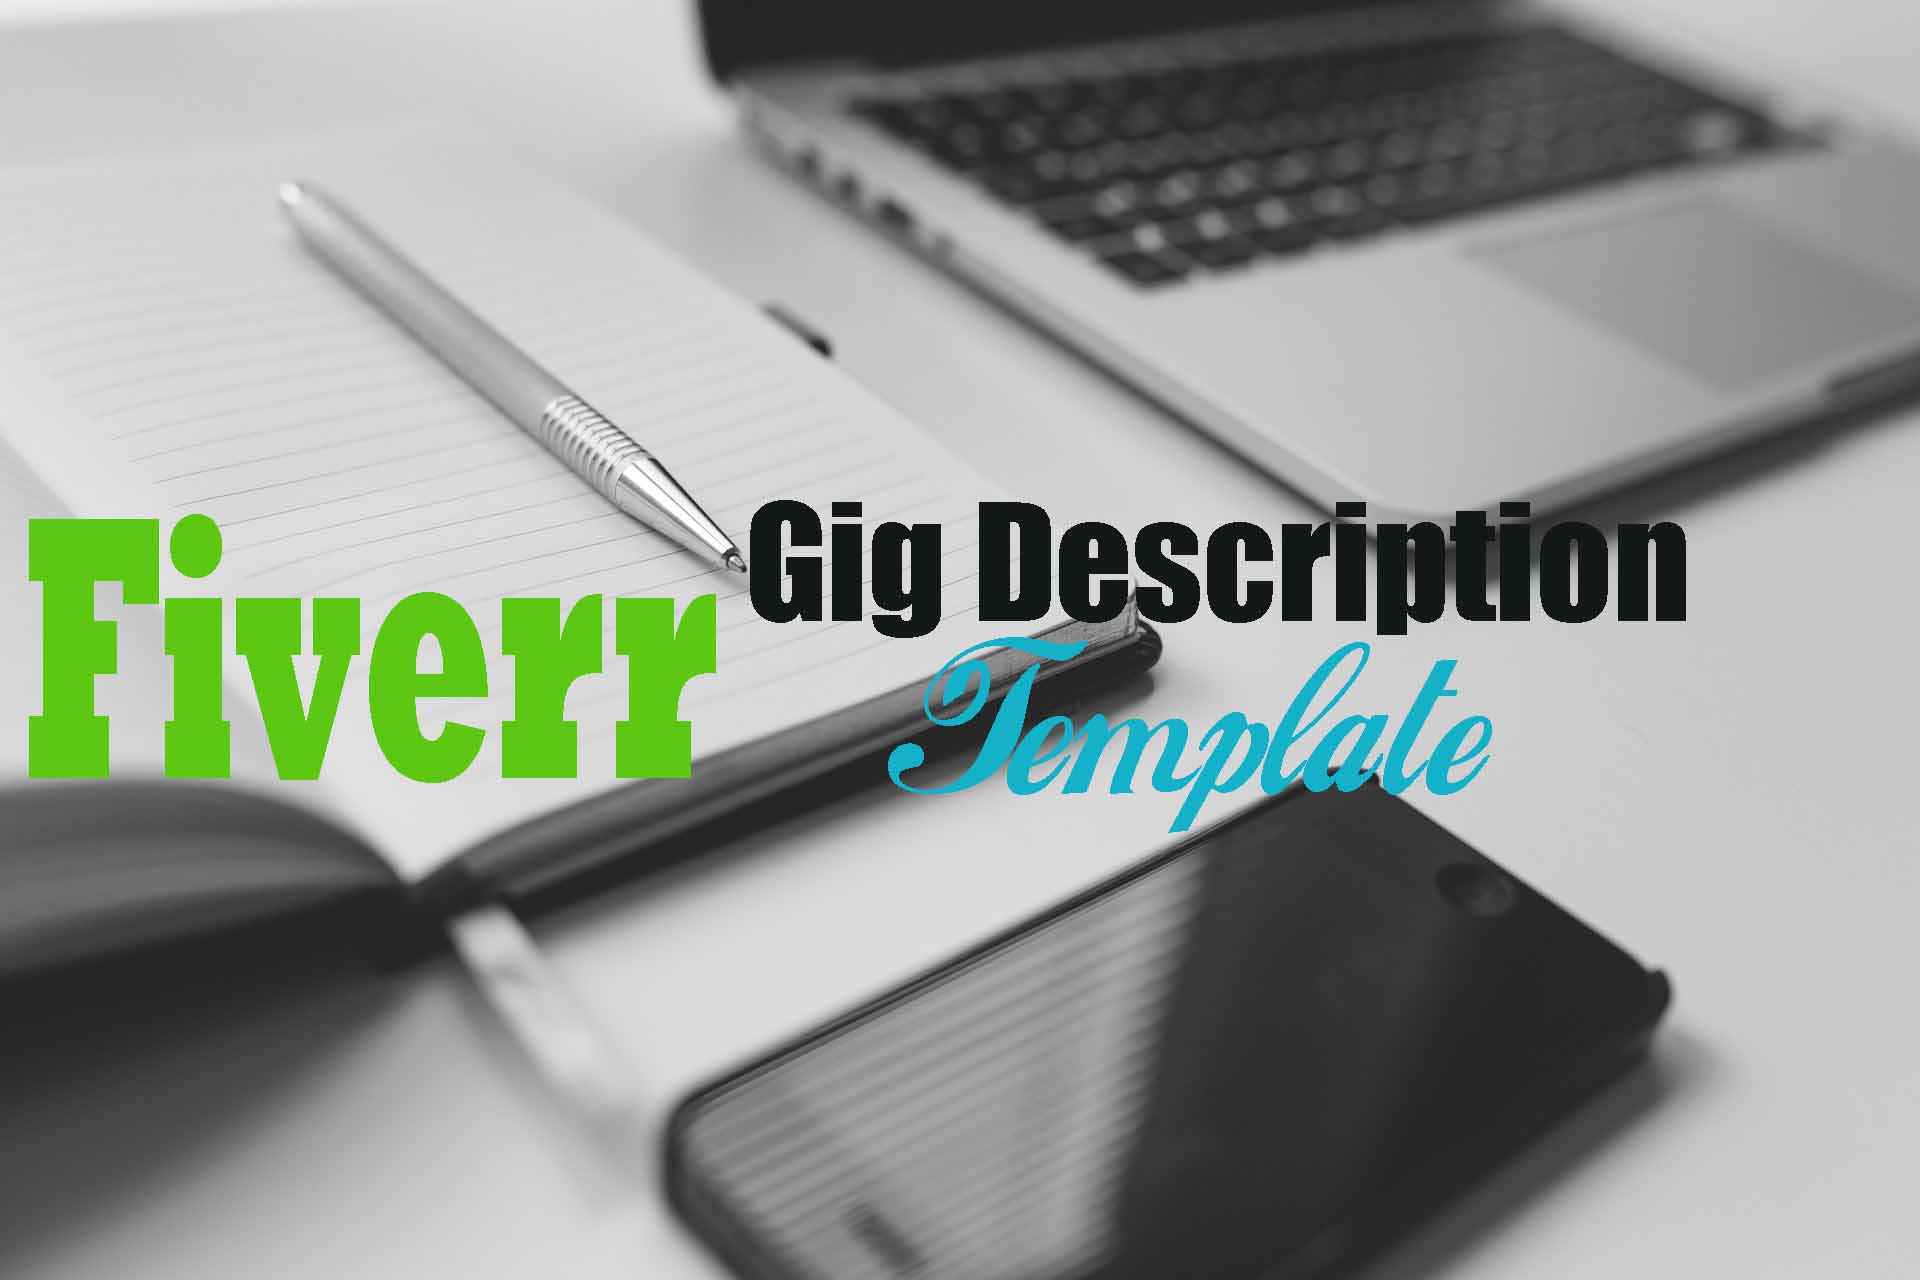 Fiverr gig creation template